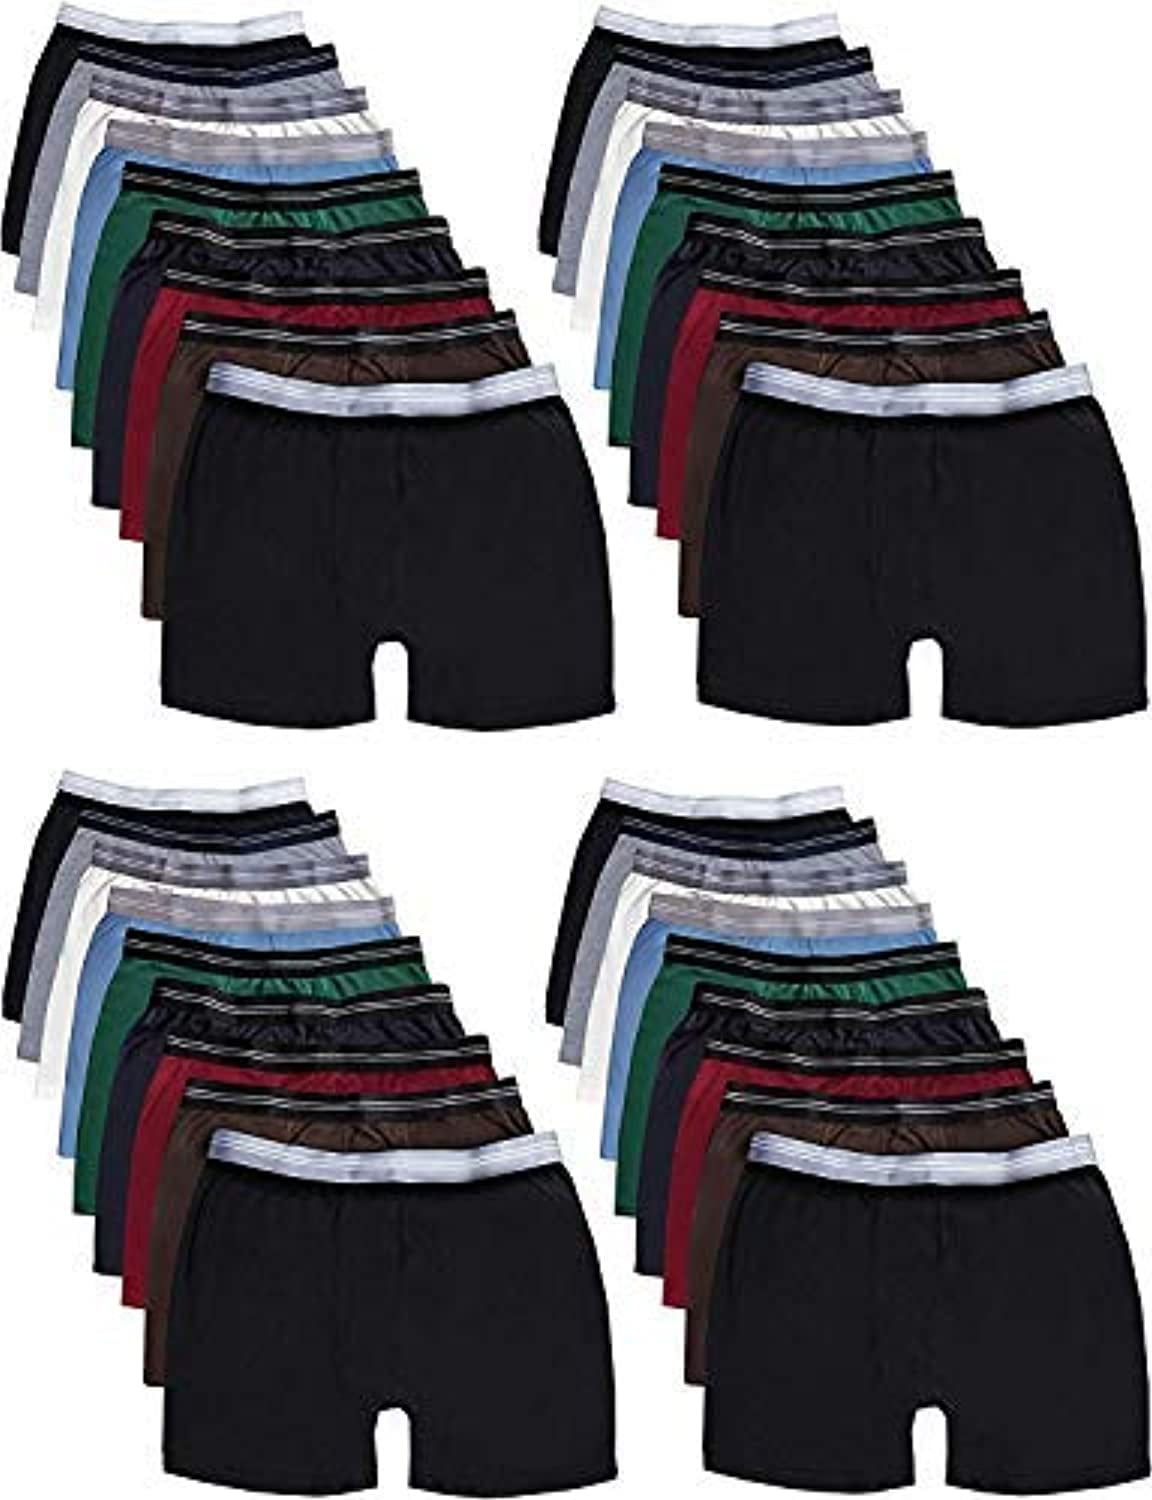 Jiuguva 72 Pack Men Cotton Briefs in Bulk for Homeless Shelter Donating, Wholesale  Underwear for Men, Breathable Underwear in 5 Assorted Size Stretch Boxer  Briefs at  Men's Clothing store